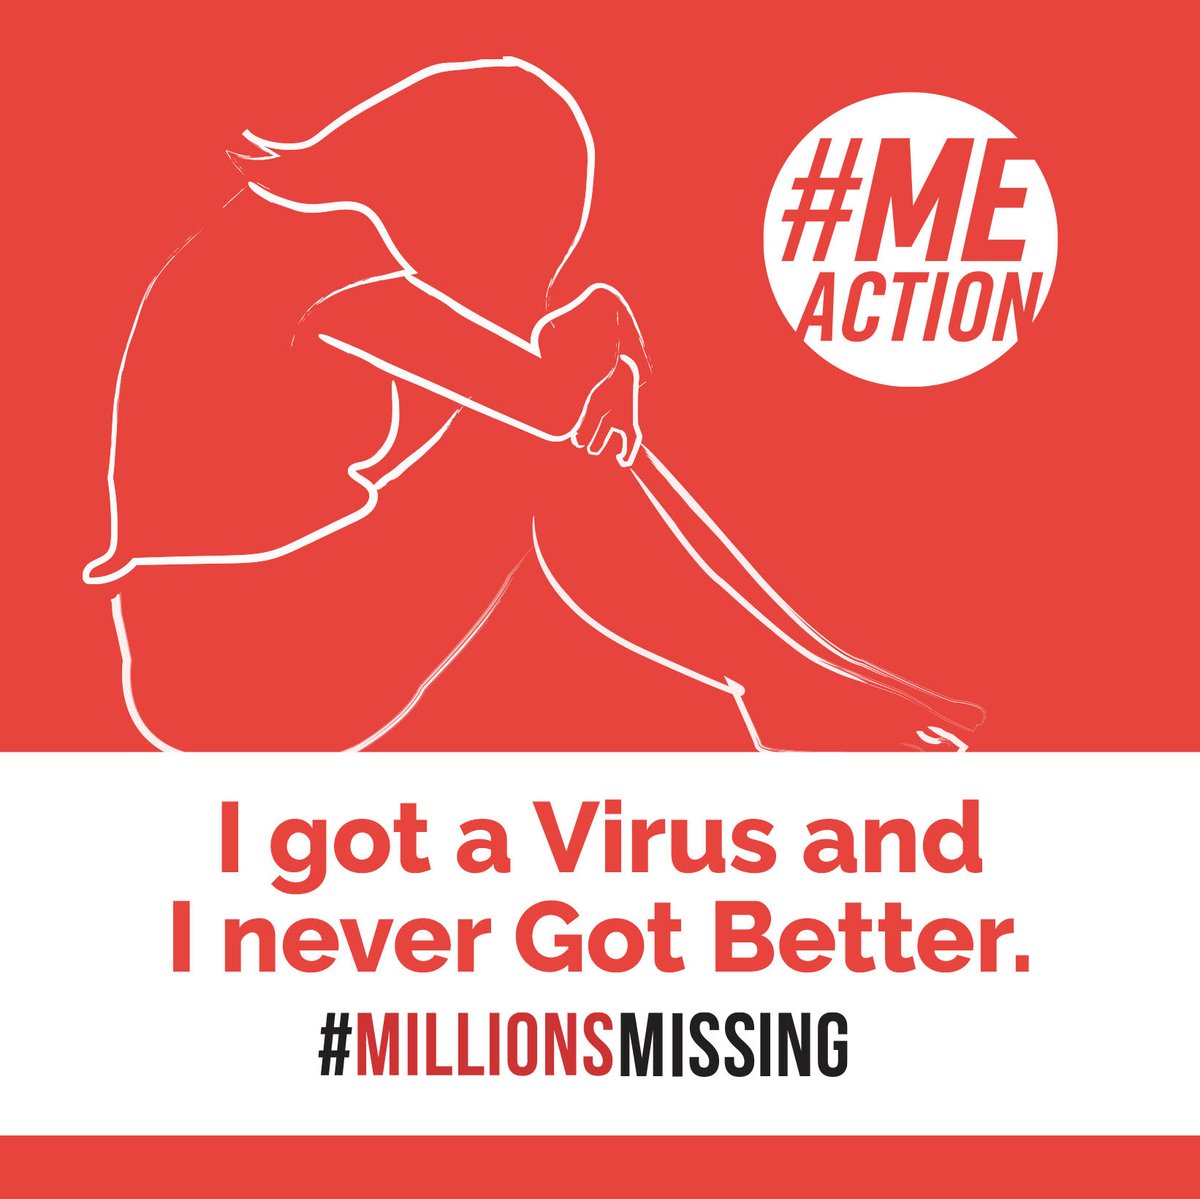 Share the story of  #MillionsMissing this week on your Social feed using these graphics.Tag  #MillionsMissing.See more graphics:  https://drive.google.com/ …/1l4prgyN59NK9DALN4f7e9RyBNPqFXhur